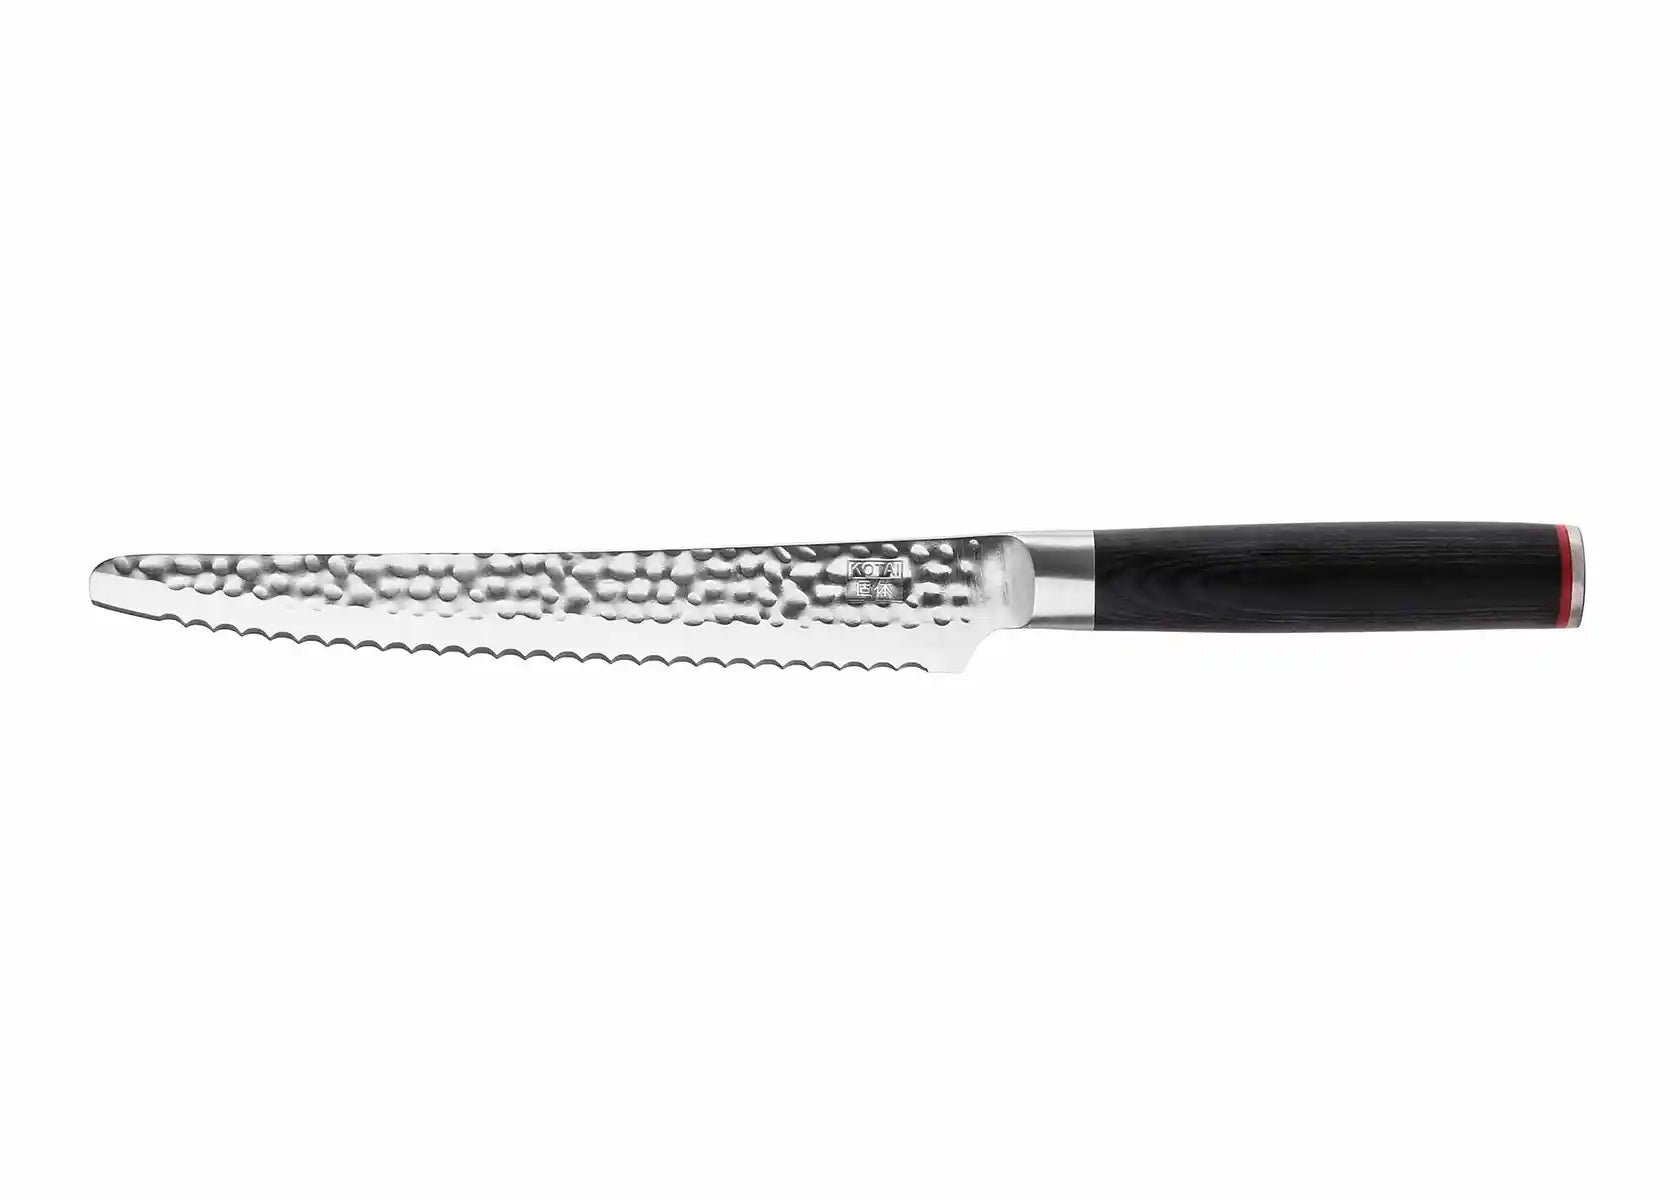 Serrated Bread Knife - Pakka Collection - 200 mm blade